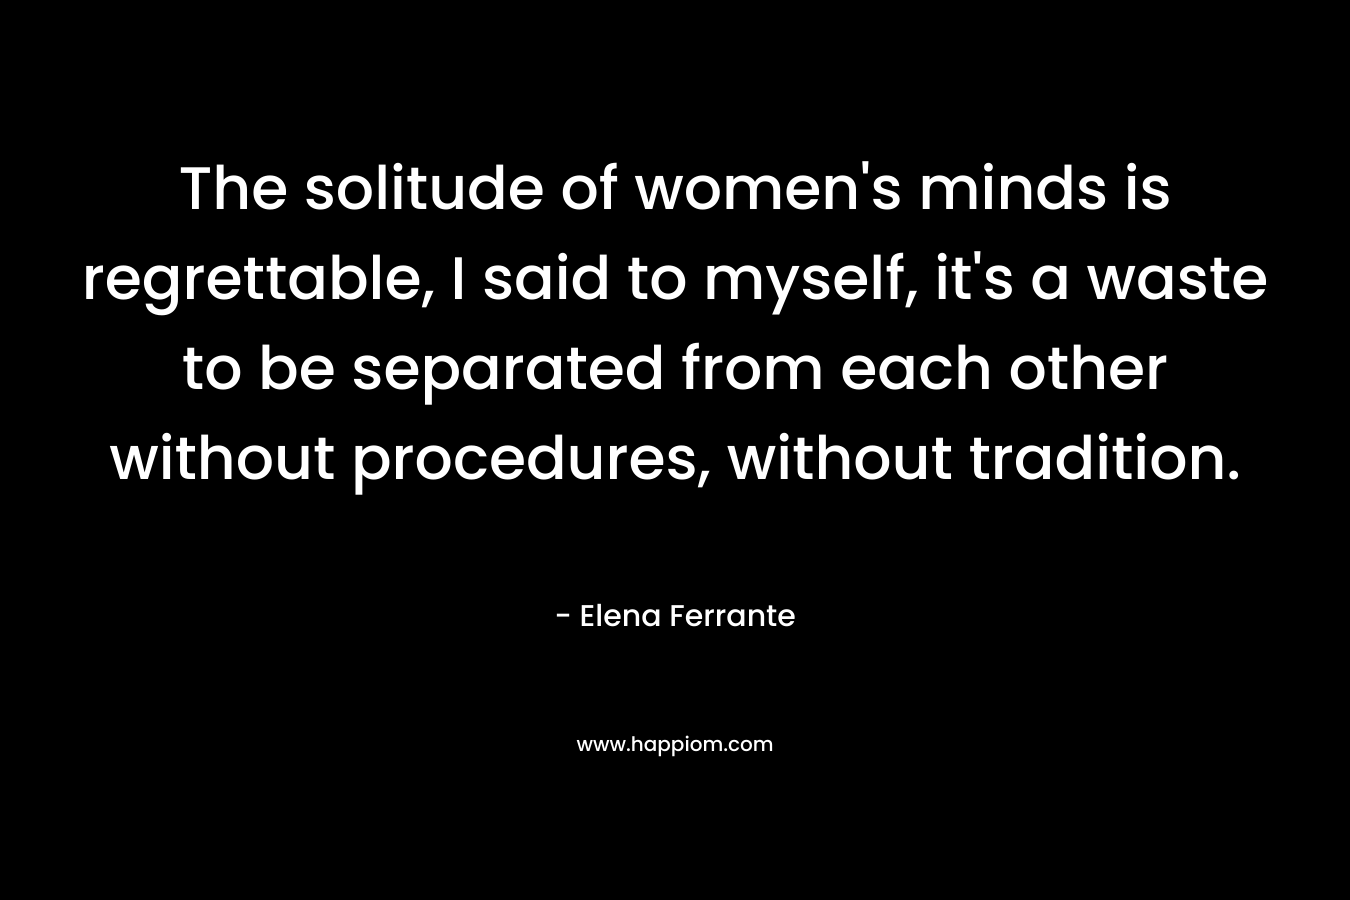 The solitude of women's minds is regrettable, I said to myself, it's a waste to be separated from each other without procedures, without tradition.